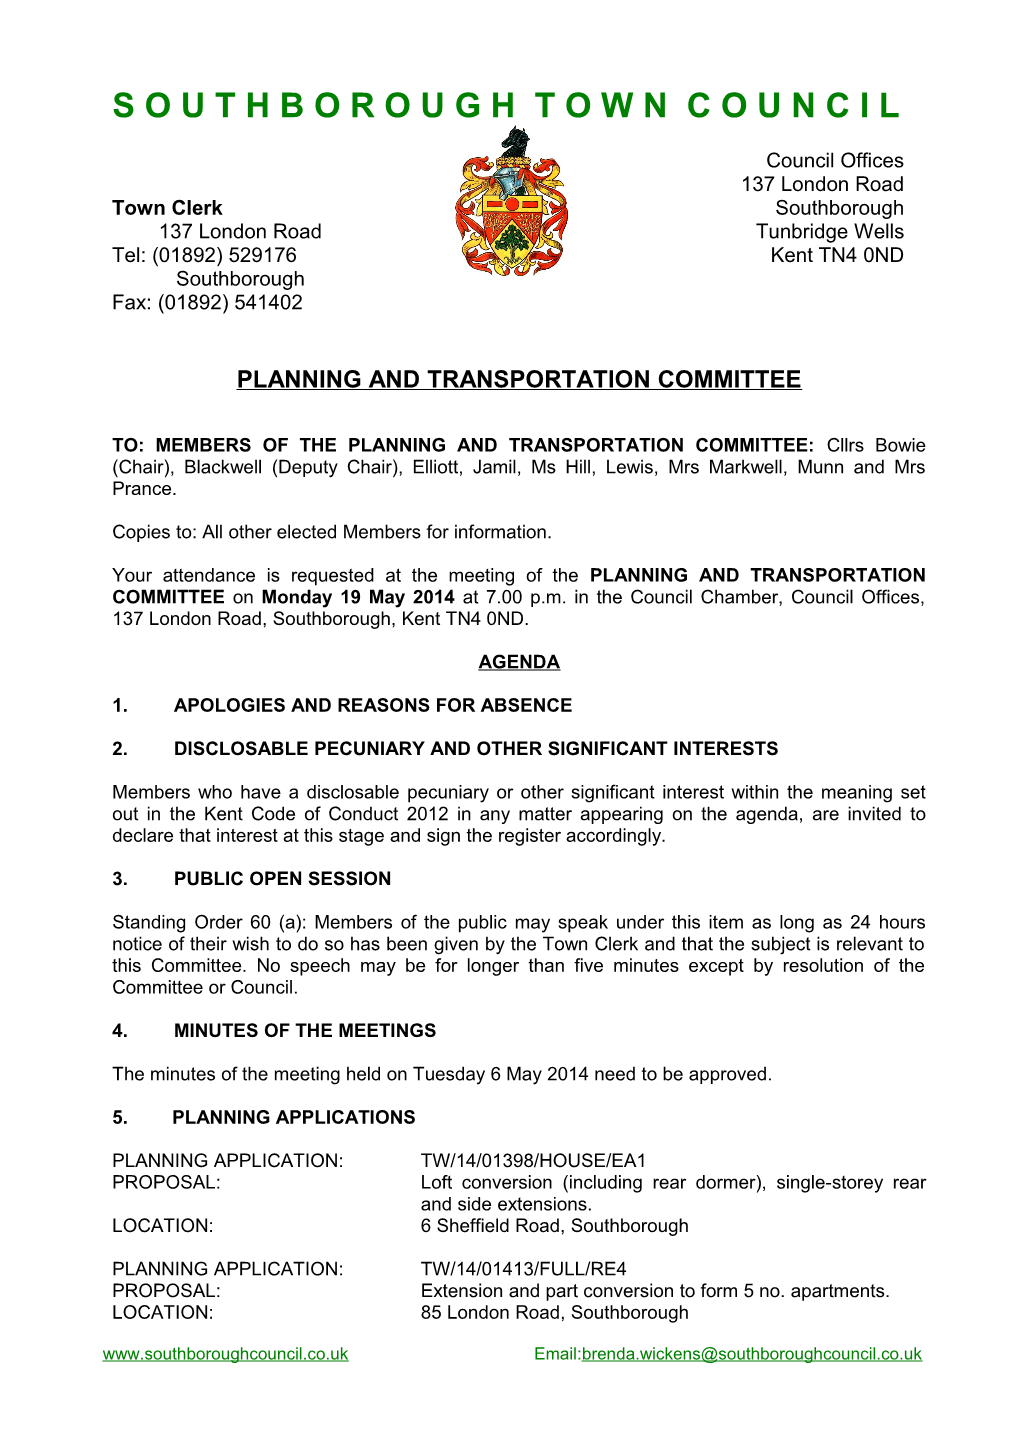 Planning and Transportation Committee s1